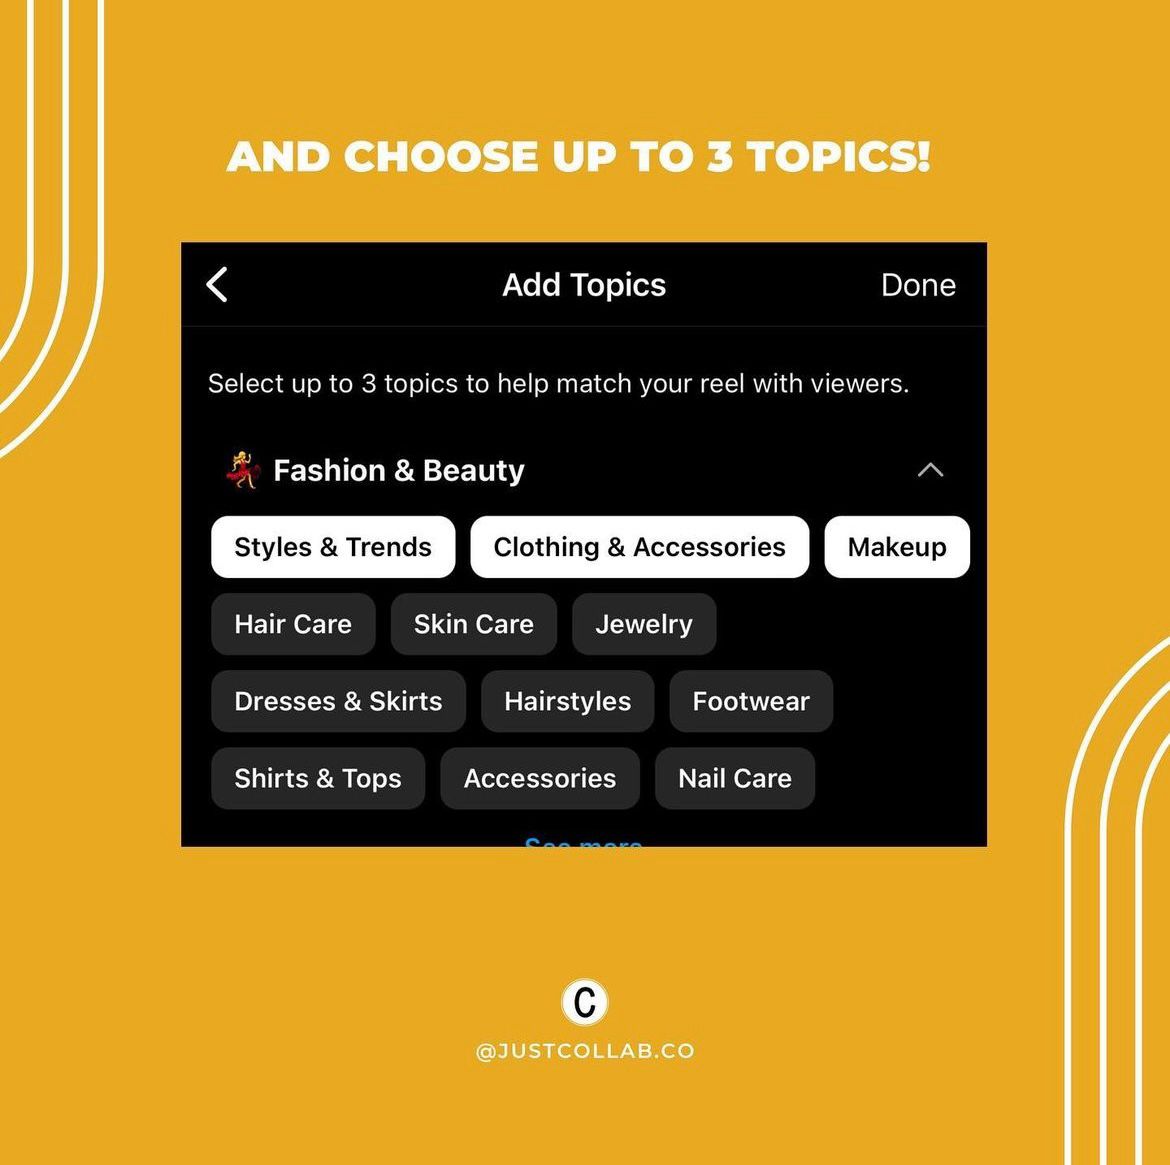 Try this feature out with new content to increase your audience. Swipe to see some topics 🙌

Follow us for more tips!

#trendingreel #trendingaudio #trendingsounds #reelsideas #reelstips #instagramgrowthhacks #instagramgrowthtips #instagramgrowthexpert #instagramtips